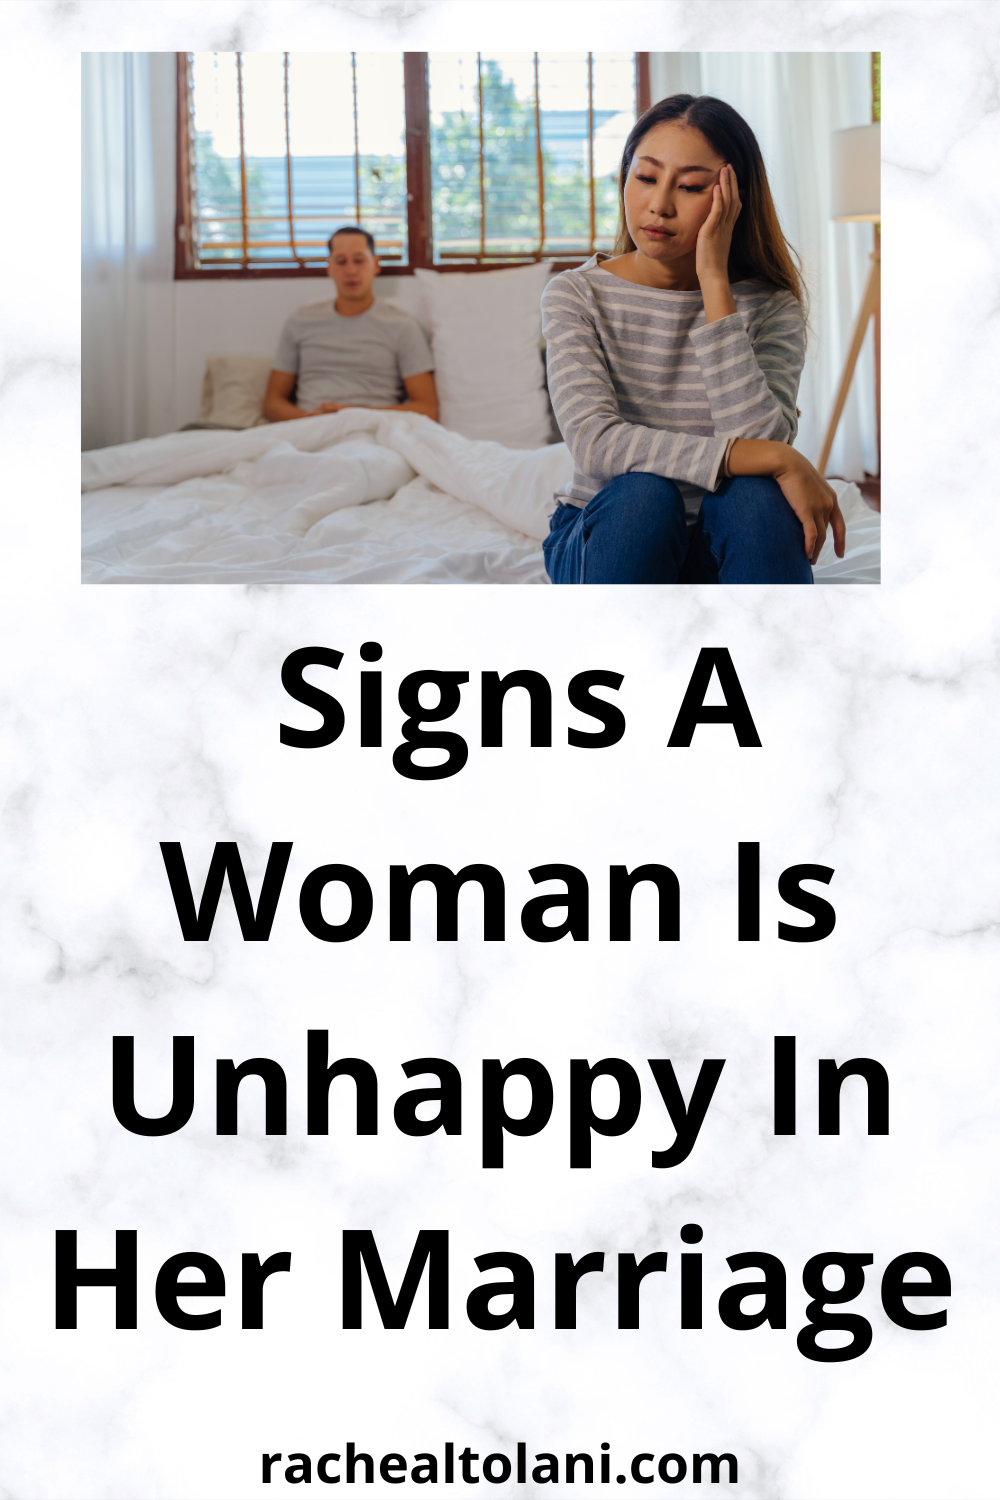 Signs a woman is in unhappy marriage